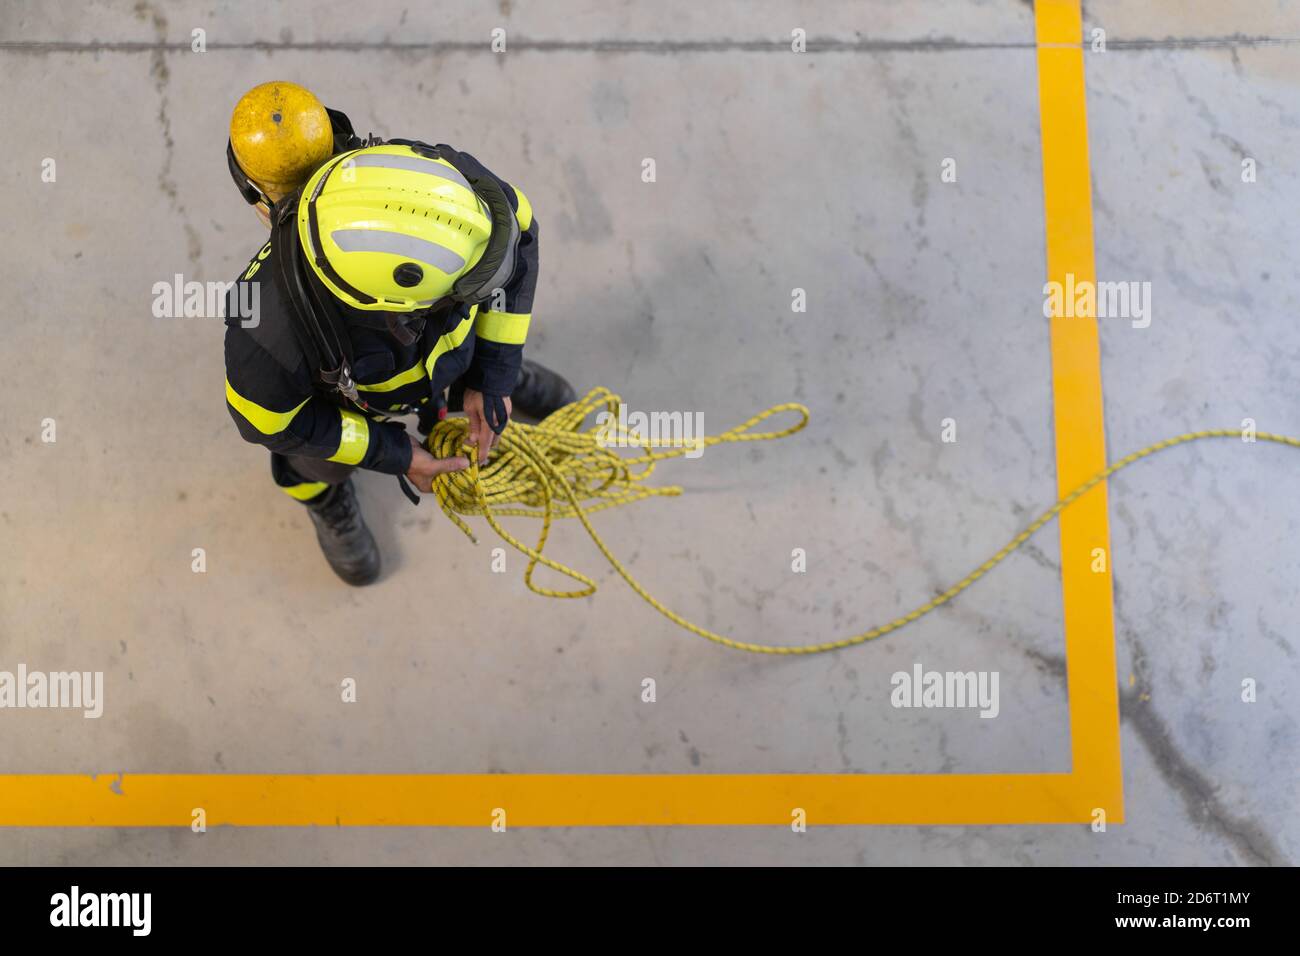 Top view of unrecognizable firefighter in protective hardhat and bright uniform standing on cement floor with rope during routine practices at work Stock Photo